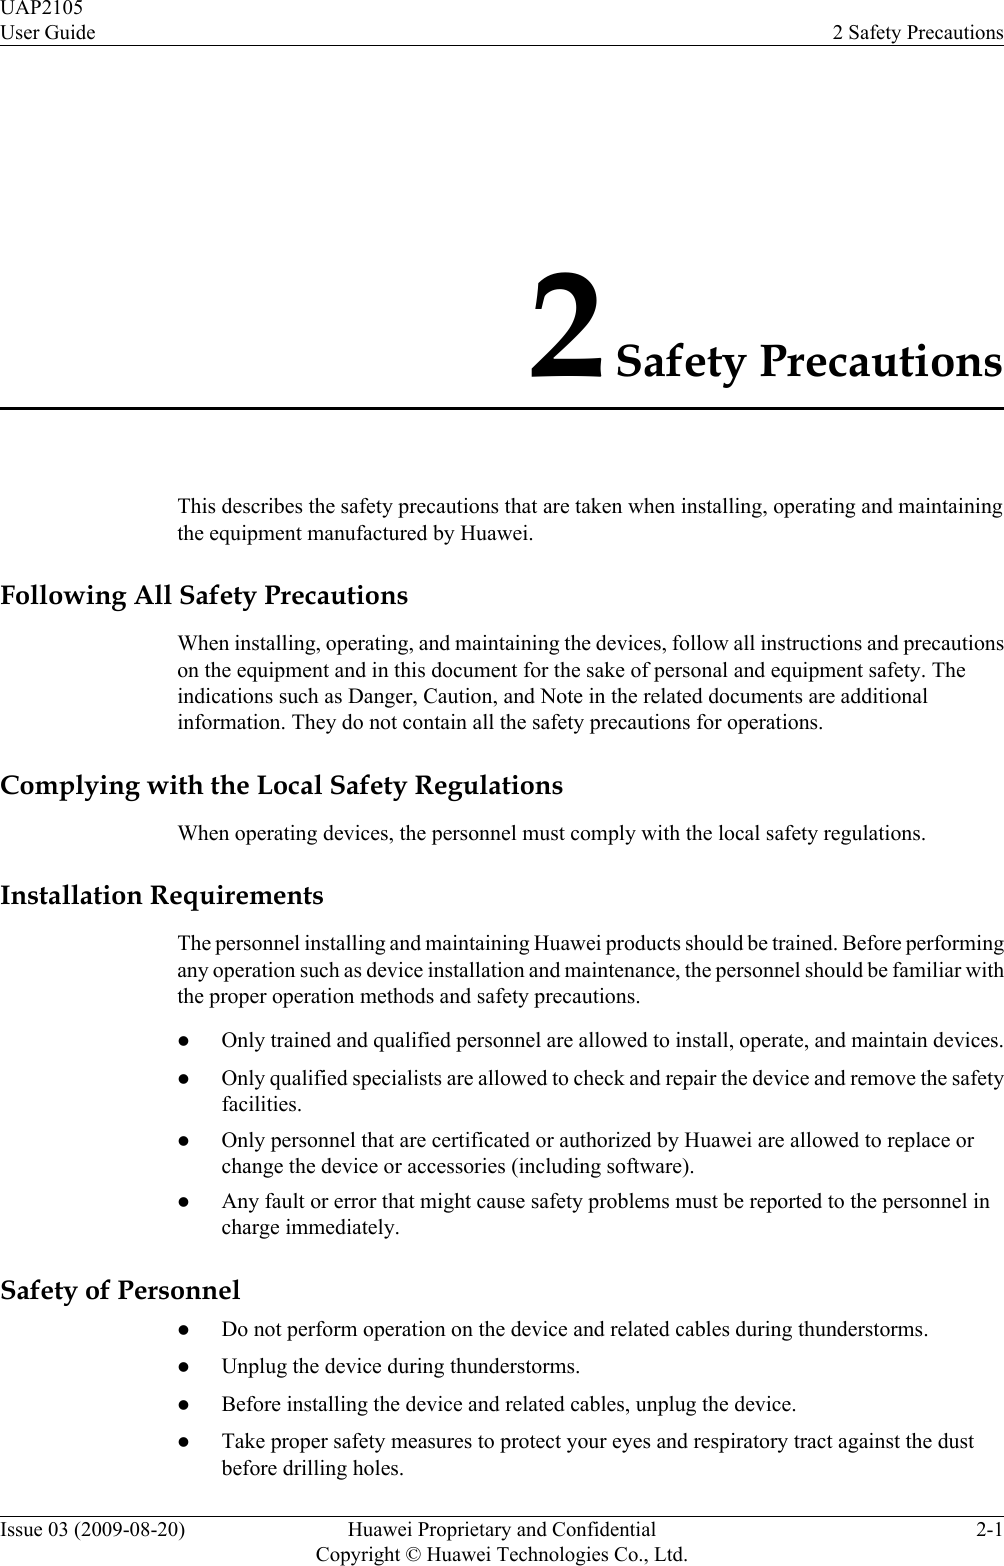 2 Safety PrecautionsThis describes the safety precautions that are taken when installing, operating and maintainingthe equipment manufactured by Huawei.Following All Safety PrecautionsWhen installing, operating, and maintaining the devices, follow all instructions and precautionson the equipment and in this document for the sake of personal and equipment safety. Theindications such as Danger, Caution, and Note in the related documents are additionalinformation. They do not contain all the safety precautions for operations.Complying with the Local Safety RegulationsWhen operating devices, the personnel must comply with the local safety regulations.Installation RequirementsThe personnel installing and maintaining Huawei products should be trained. Before performingany operation such as device installation and maintenance, the personnel should be familiar withthe proper operation methods and safety precautions.lOnly trained and qualified personnel are allowed to install, operate, and maintain devices.lOnly qualified specialists are allowed to check and repair the device and remove the safetyfacilities.lOnly personnel that are certificated or authorized by Huawei are allowed to replace orchange the device or accessories (including software).lAny fault or error that might cause safety problems must be reported to the personnel incharge immediately.Safety of PersonnellDo not perform operation on the device and related cables during thunderstorms.lUnplug the device during thunderstorms.lBefore installing the device and related cables, unplug the device.lTake proper safety measures to protect your eyes and respiratory tract against the dustbefore drilling holes.UAP2105User Guide 2 Safety PrecautionsIssue 03 (2009-08-20) Huawei Proprietary and ConfidentialCopyright © Huawei Technologies Co., Ltd.2-1